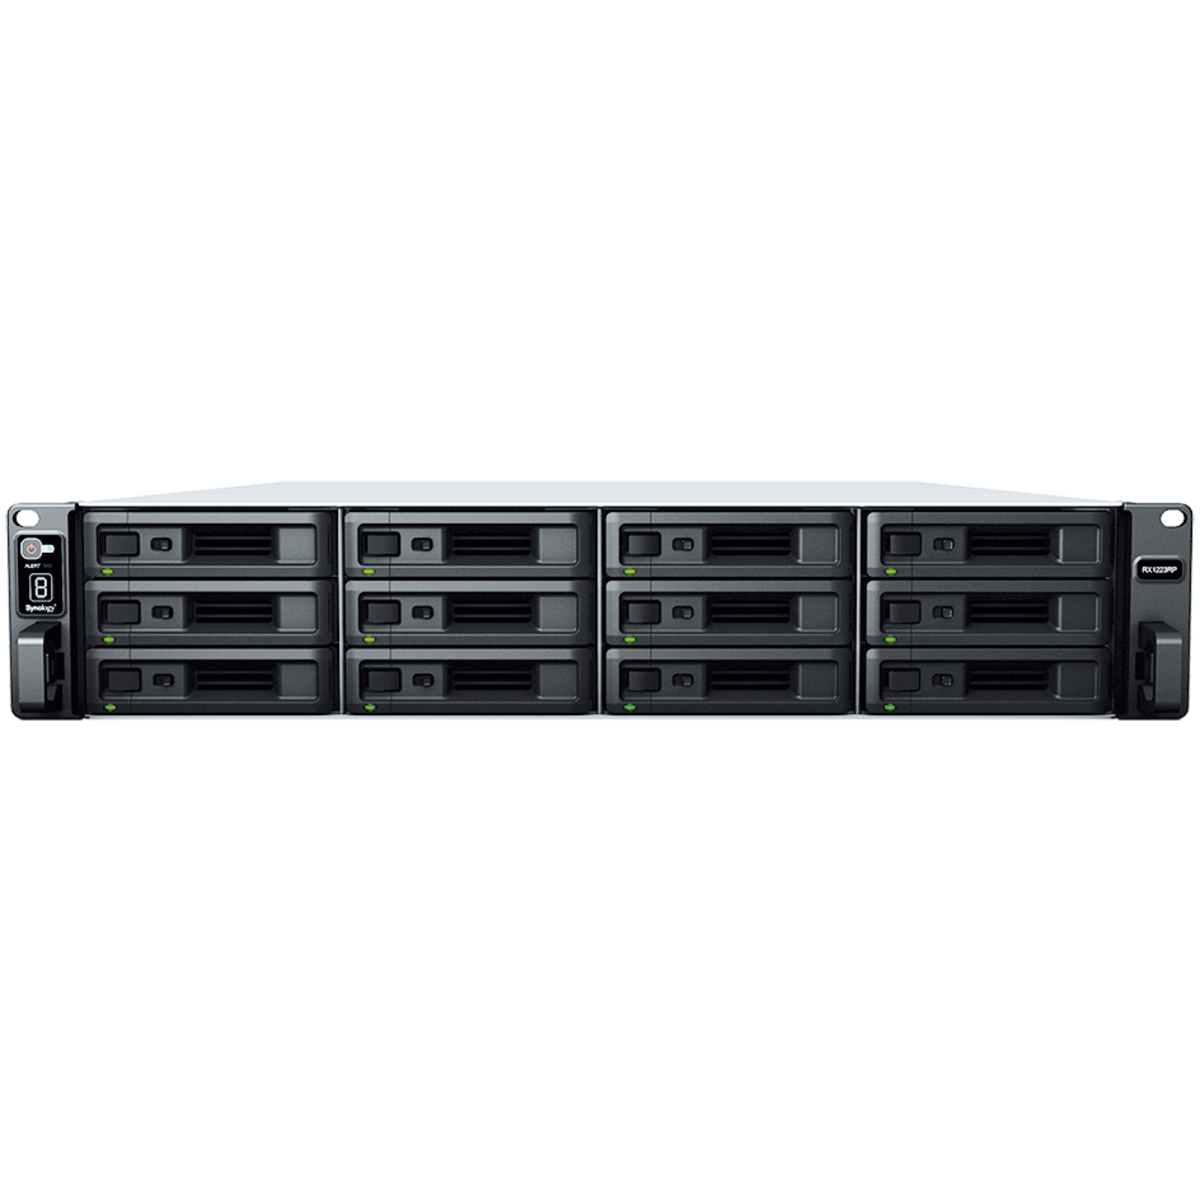 Synology RX1223RP External Expansion Drive 242tb 12-Bay RackMount Large Business / Enterprise Expansion Enclosure 11x22tb Western Digital Red Pro WD221KFGX 3.5 7200rpm SATA 6Gb/s HDD NAS Class Drives Installed - Burn-In Tested RX1223RP External Expansion Drive